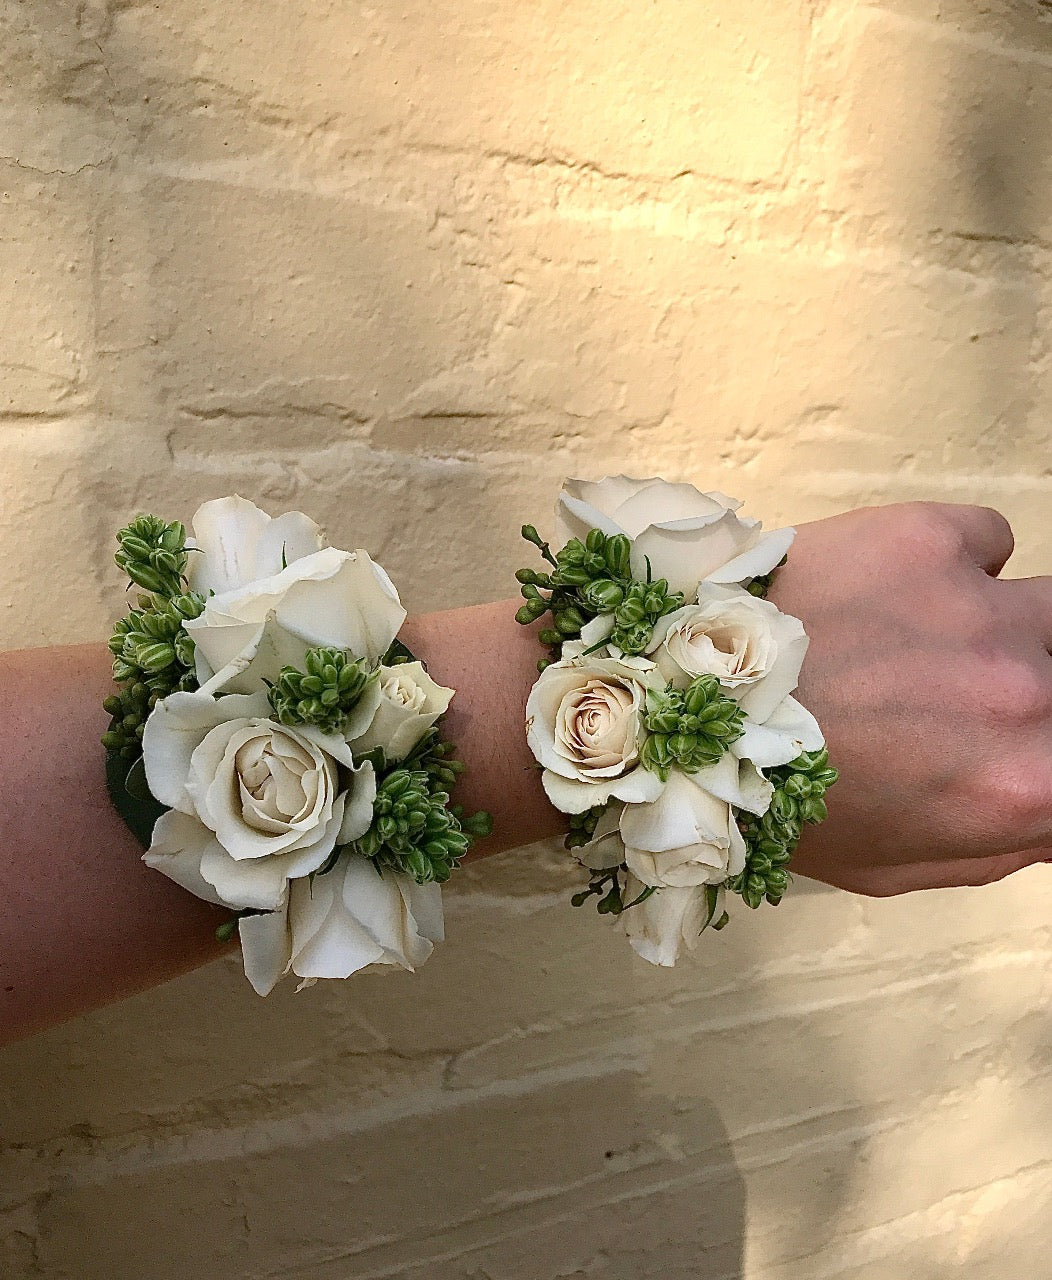 Two wrist corsages made from spray roses and texture, against a yellow brick wall. 